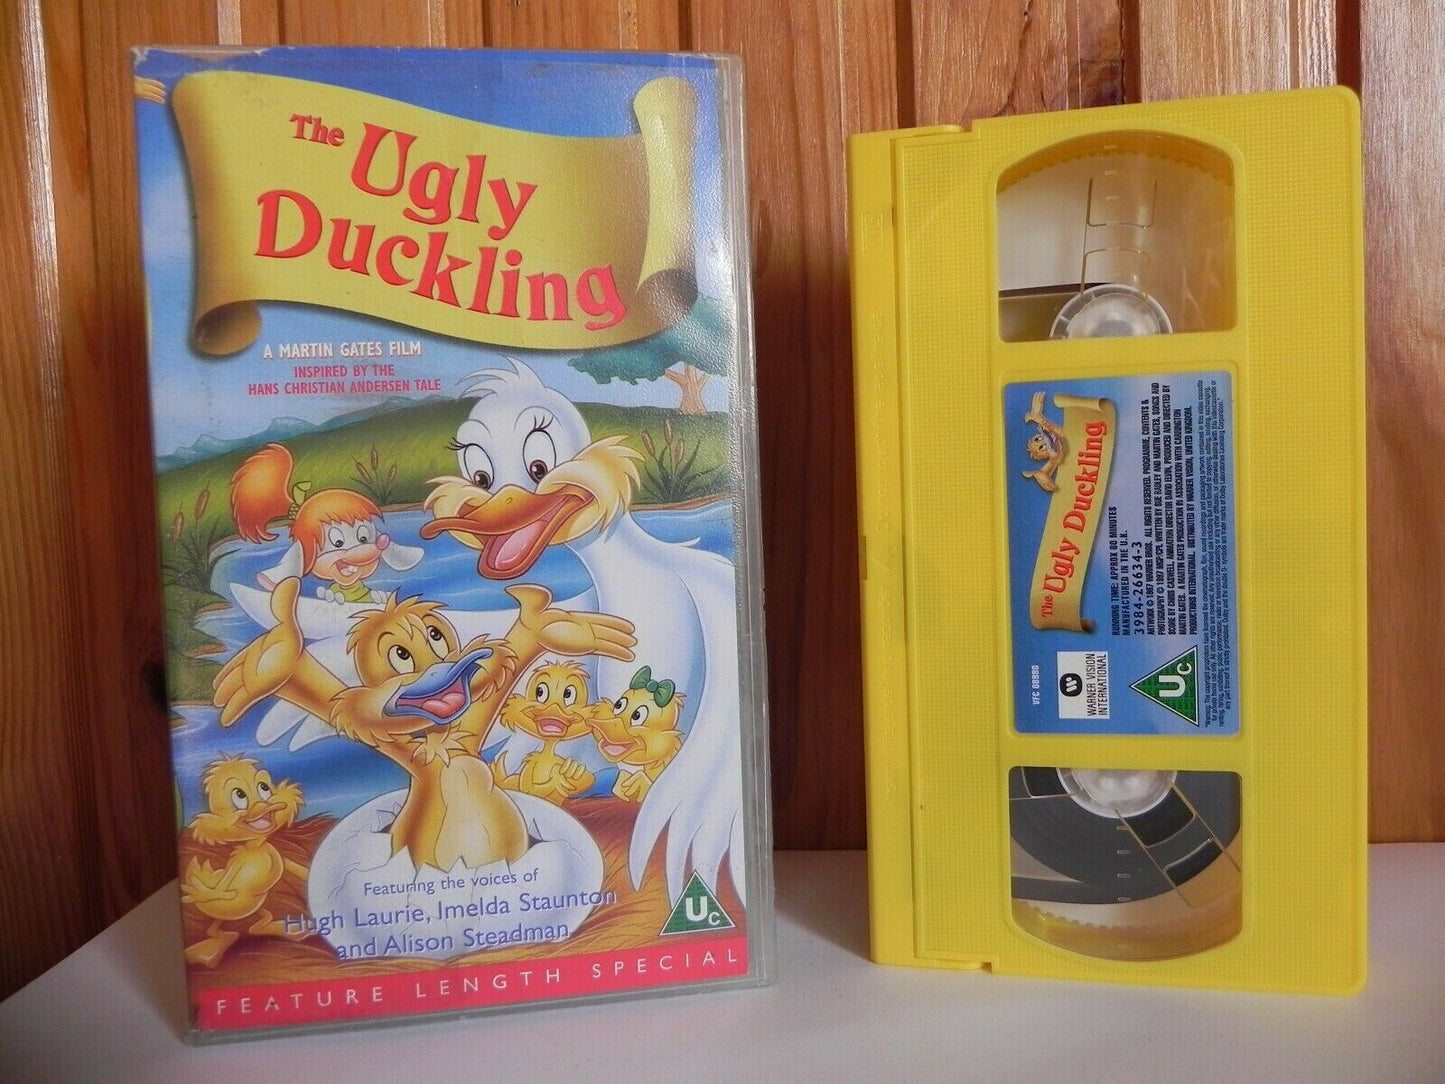 The Ugly Duckling - Warner Vision - Animated - Adventure - Children's - Pal VHS-